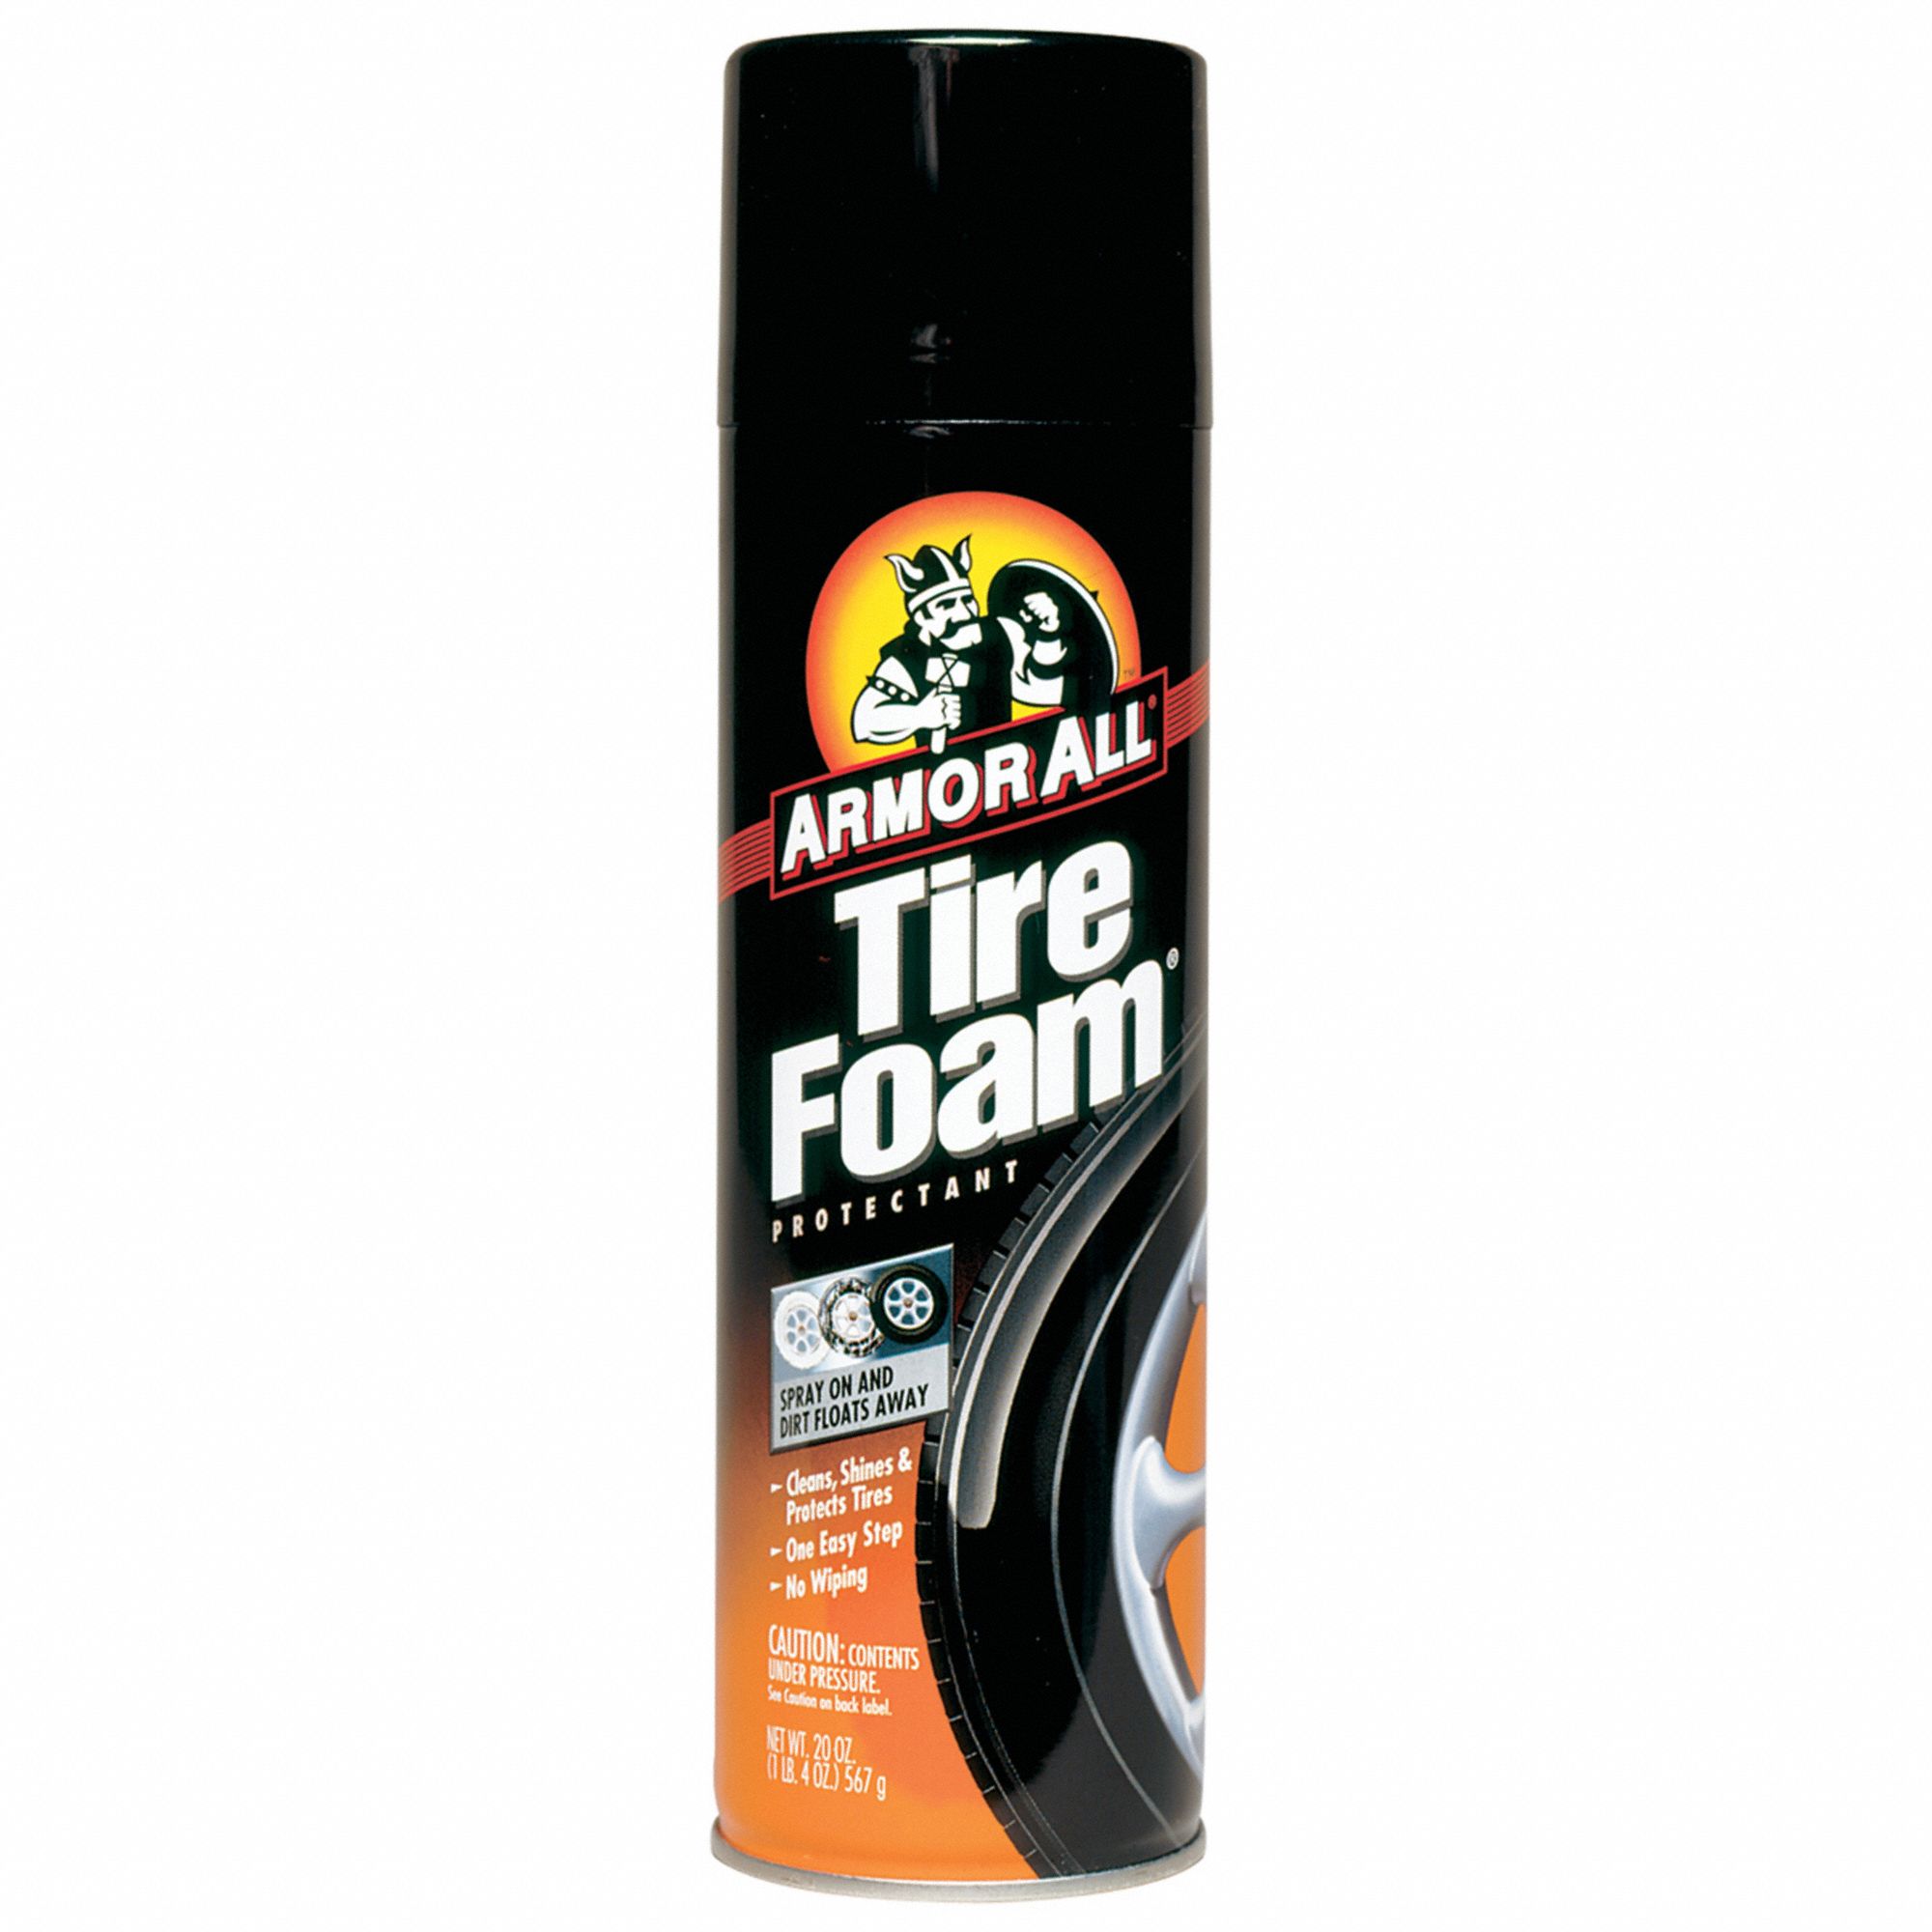 CYCLO Foam Away Tire Care, 19 Oz / 539 G, 12 Pack - All American